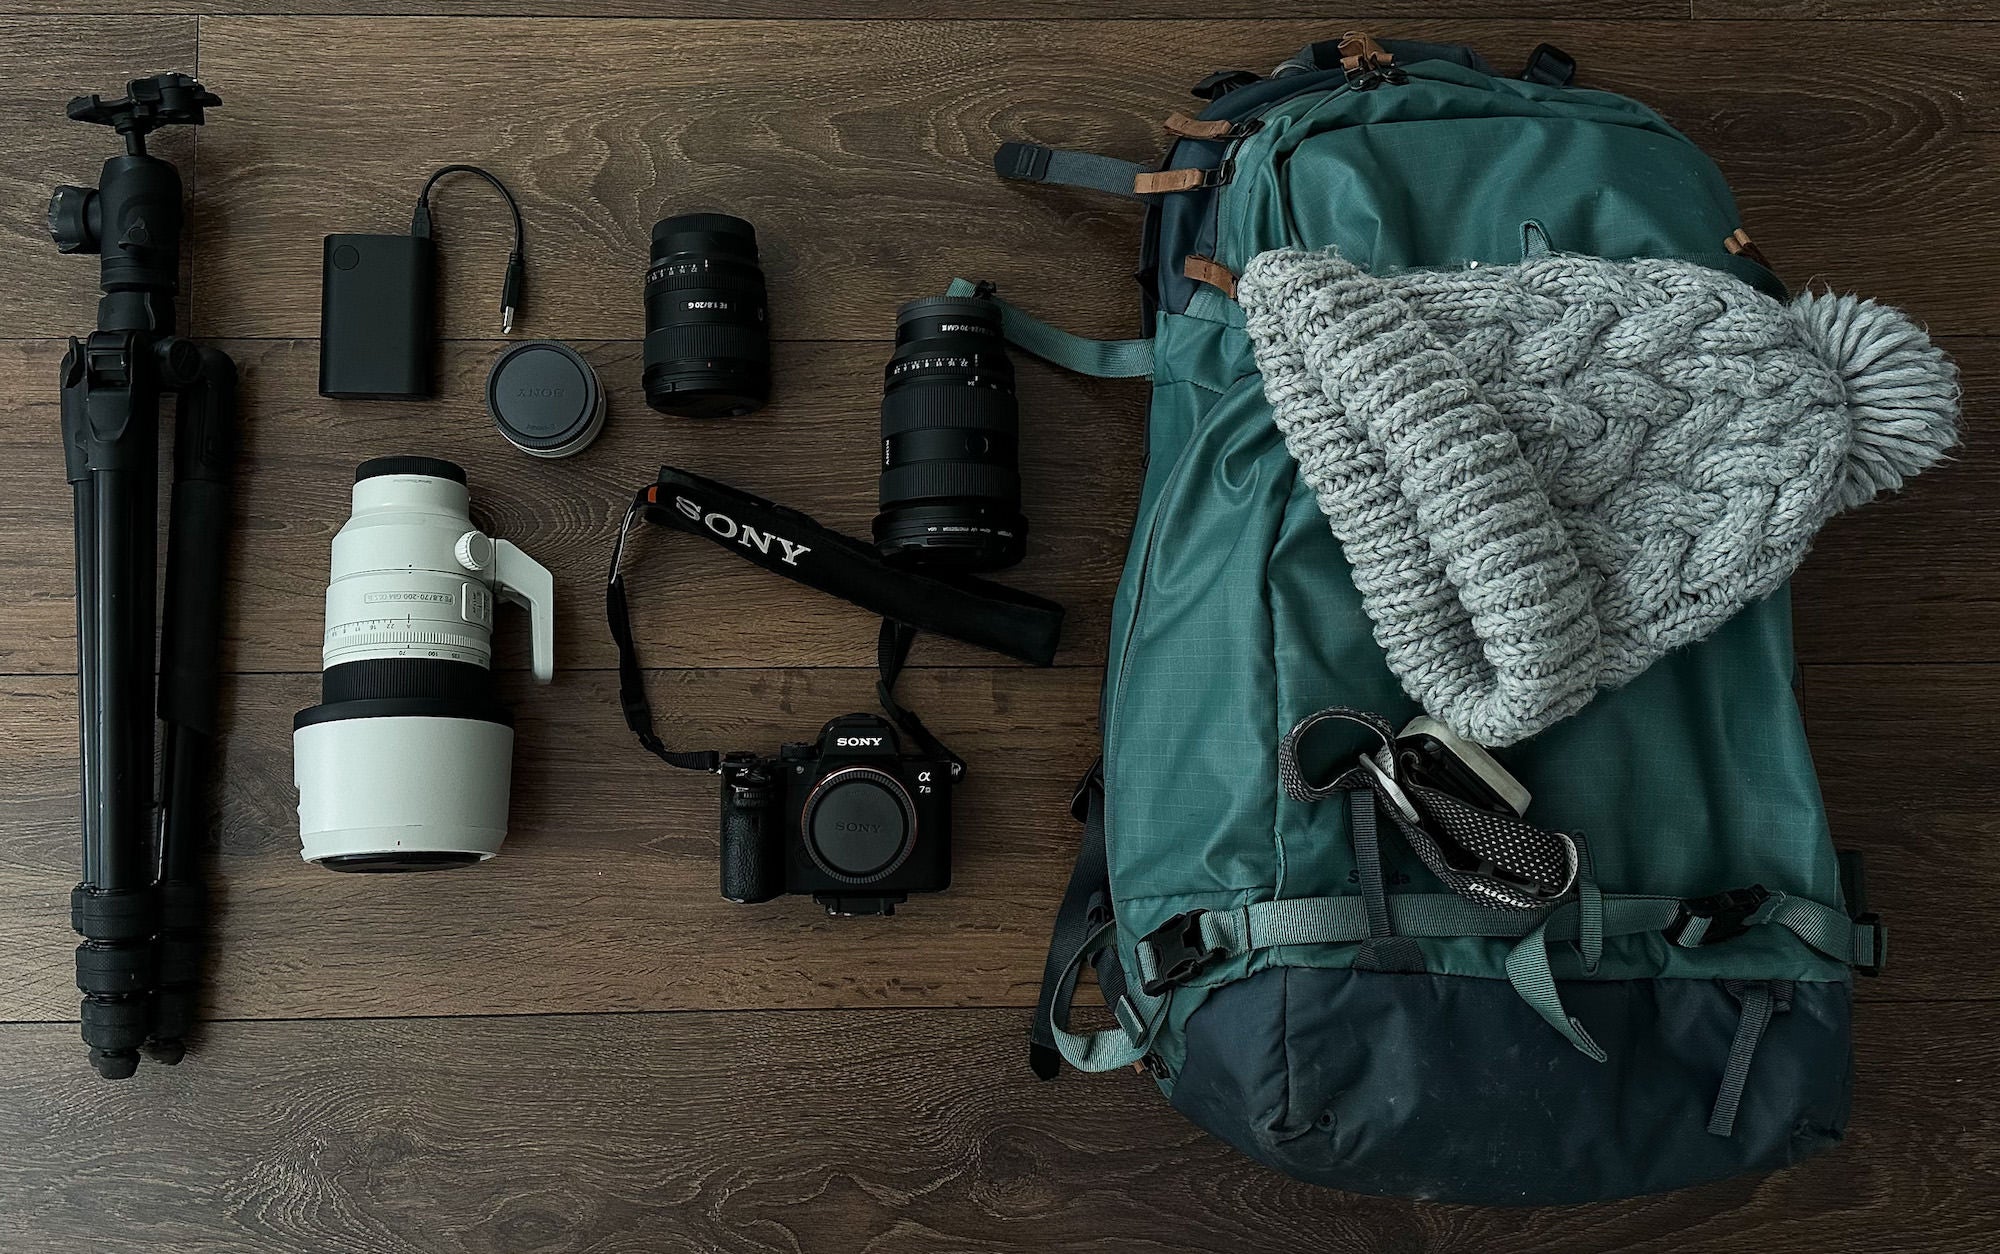 Sara Boychuk's photography gear for cold weather adventures